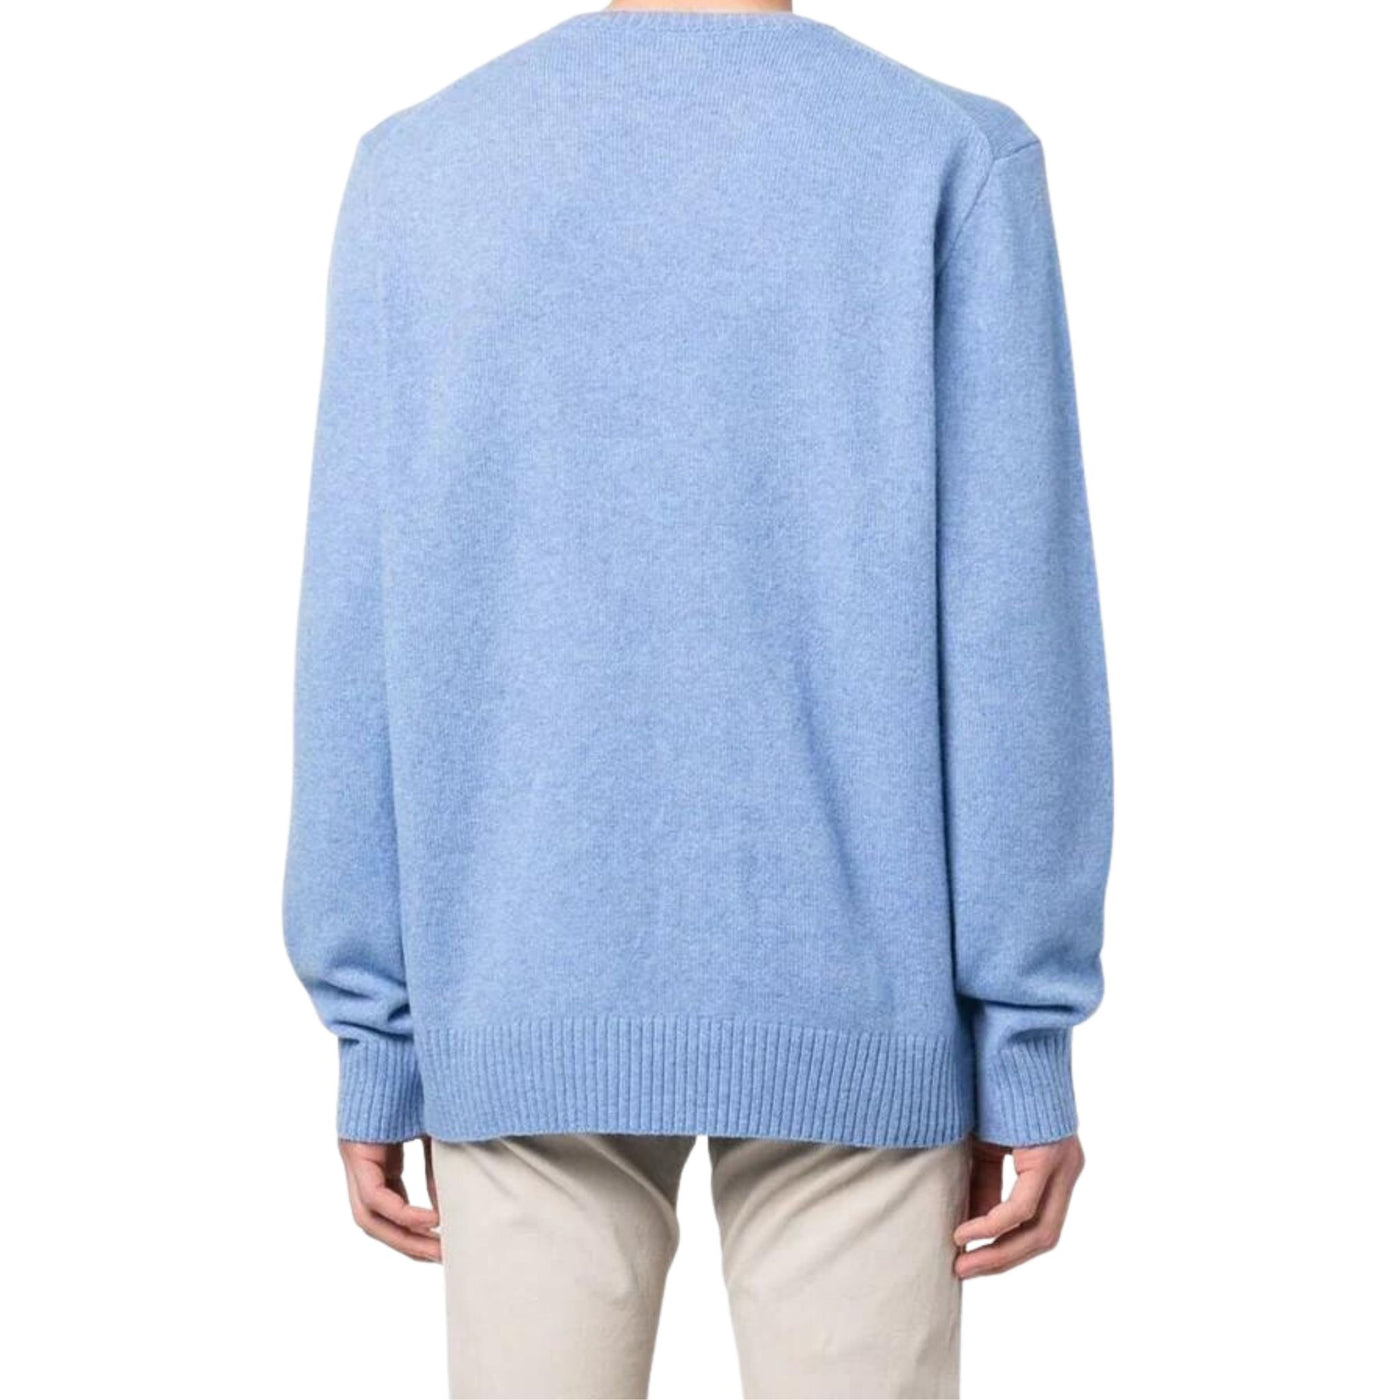 Men's sweater with ribbed hem